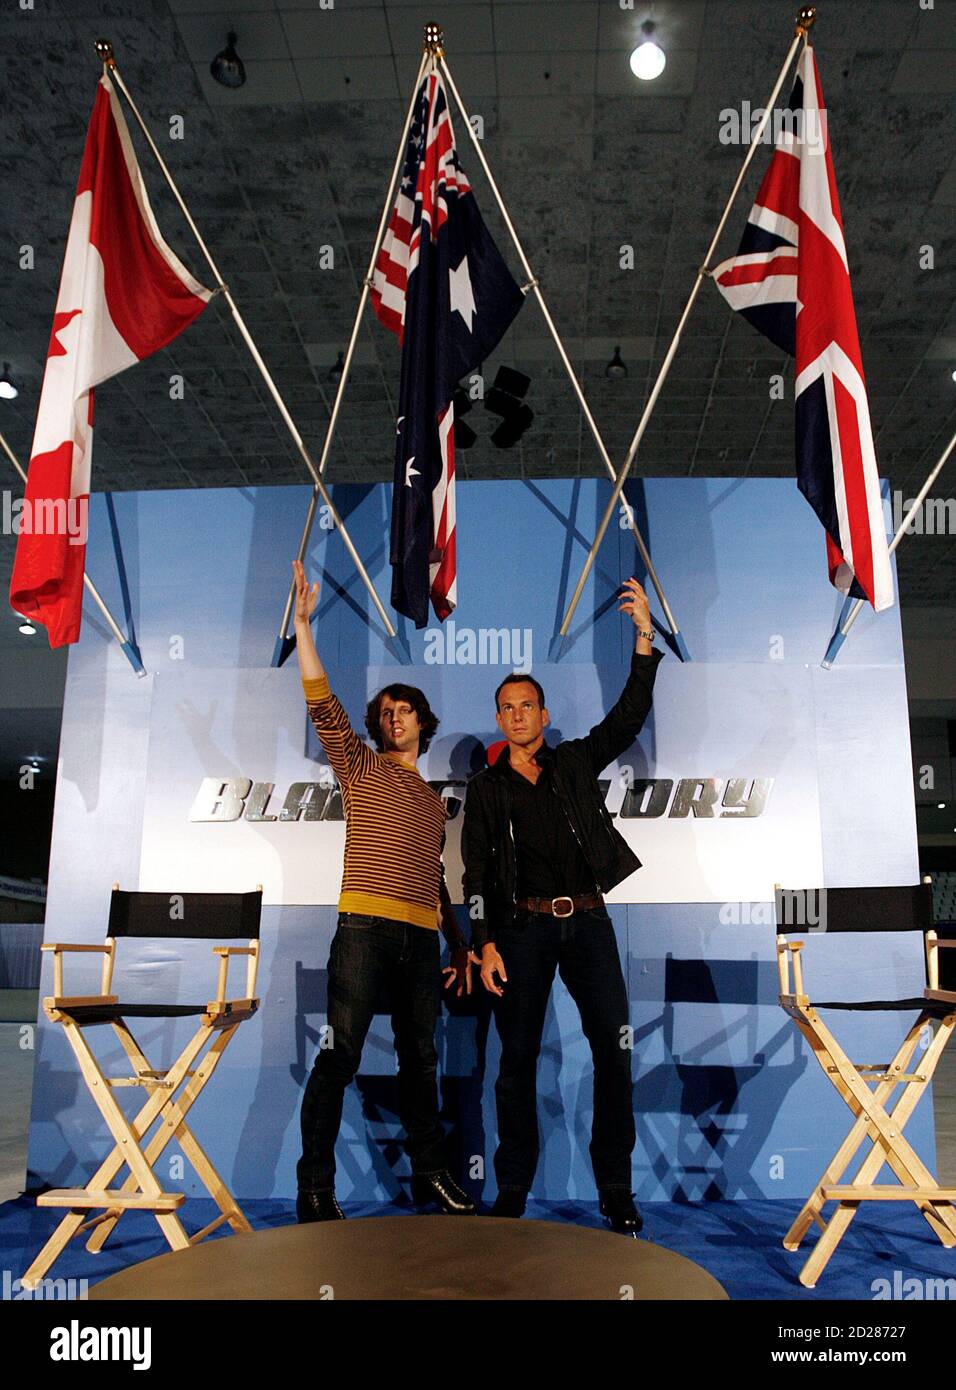 Actors Jon Heder (L) and Will Arnett arrive at a news conference at an ice skating rink to promote their film "Blades of Glory" in Sydney June 6, 2007.         REUTERS/Tim Wimborne     (AUSTRALIA) Stock Photo